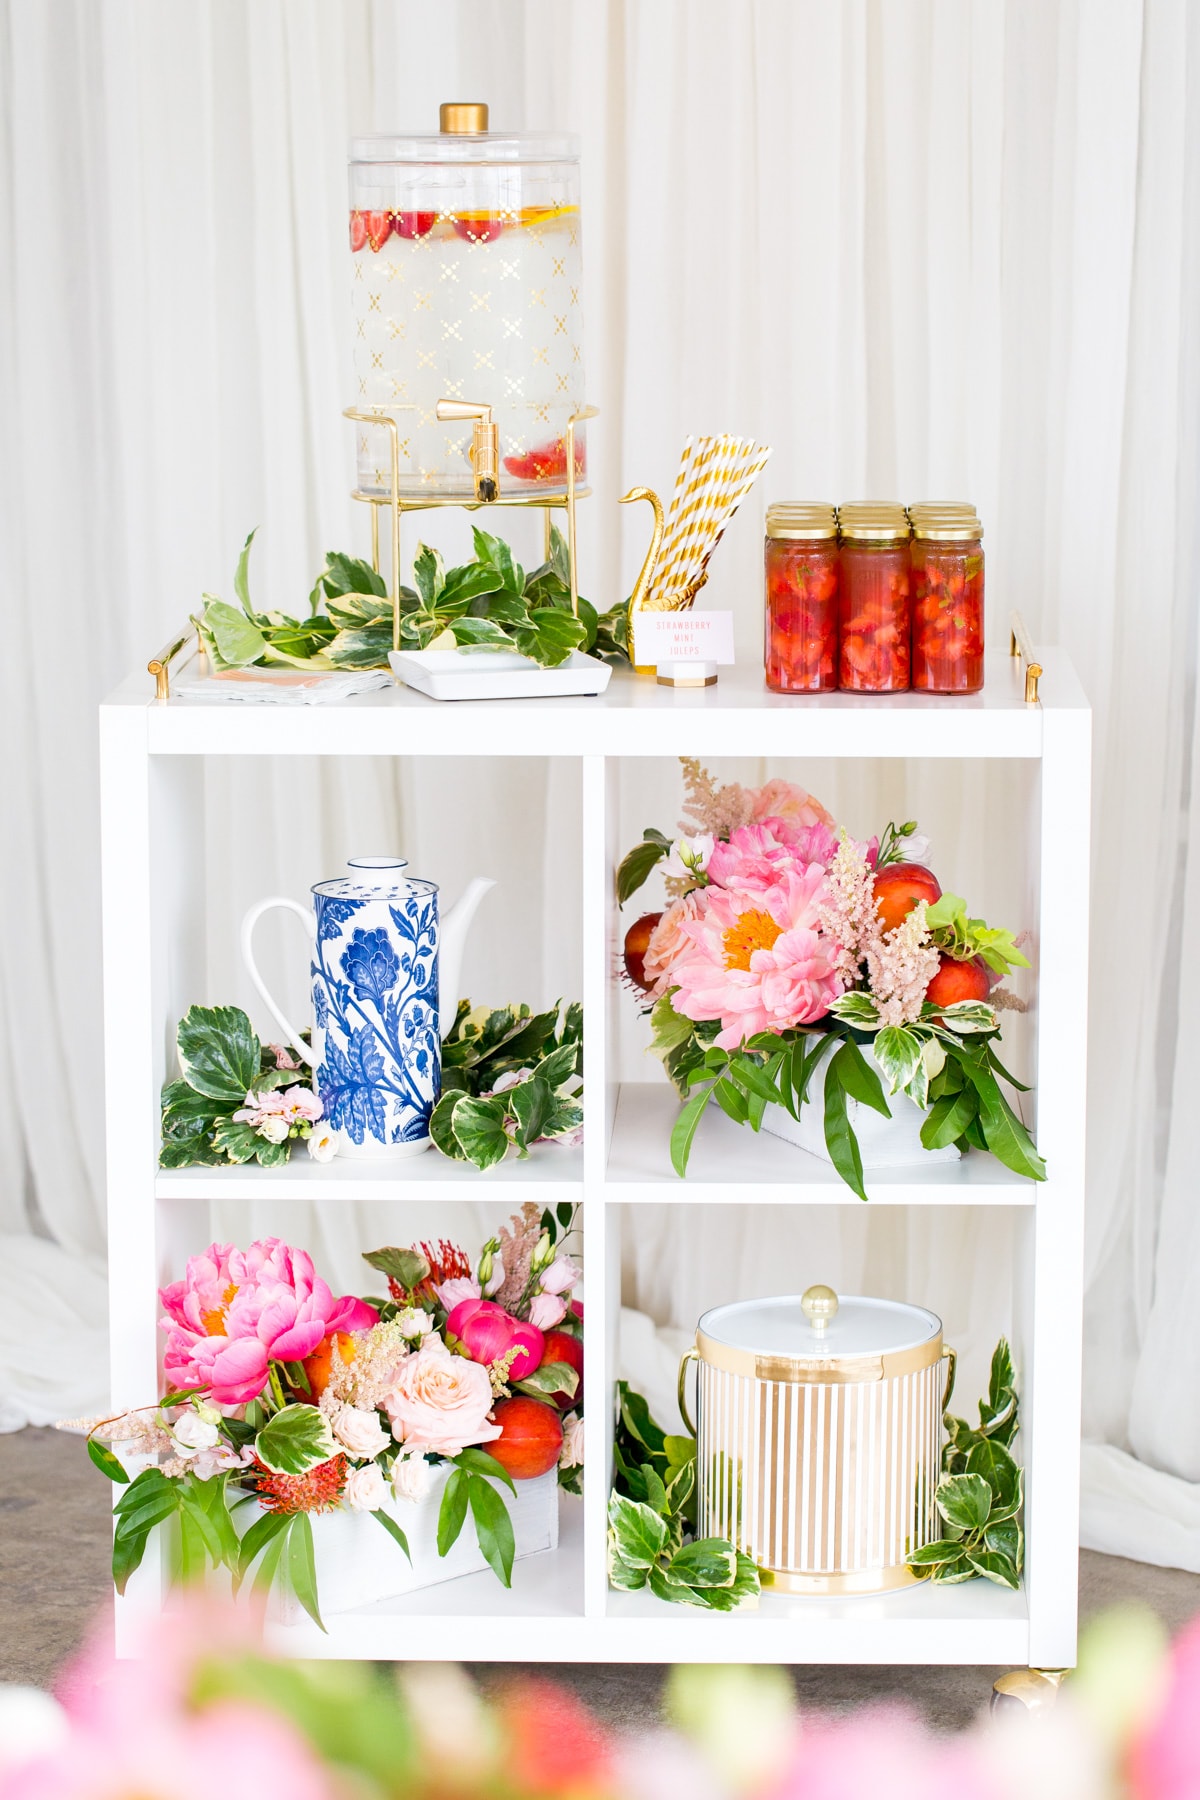 A Southern Inspired Bridal Shower and DIY Backdrop by Ashley Rose of Sugar & Cloth, a lifestyle blog in Houston, TX